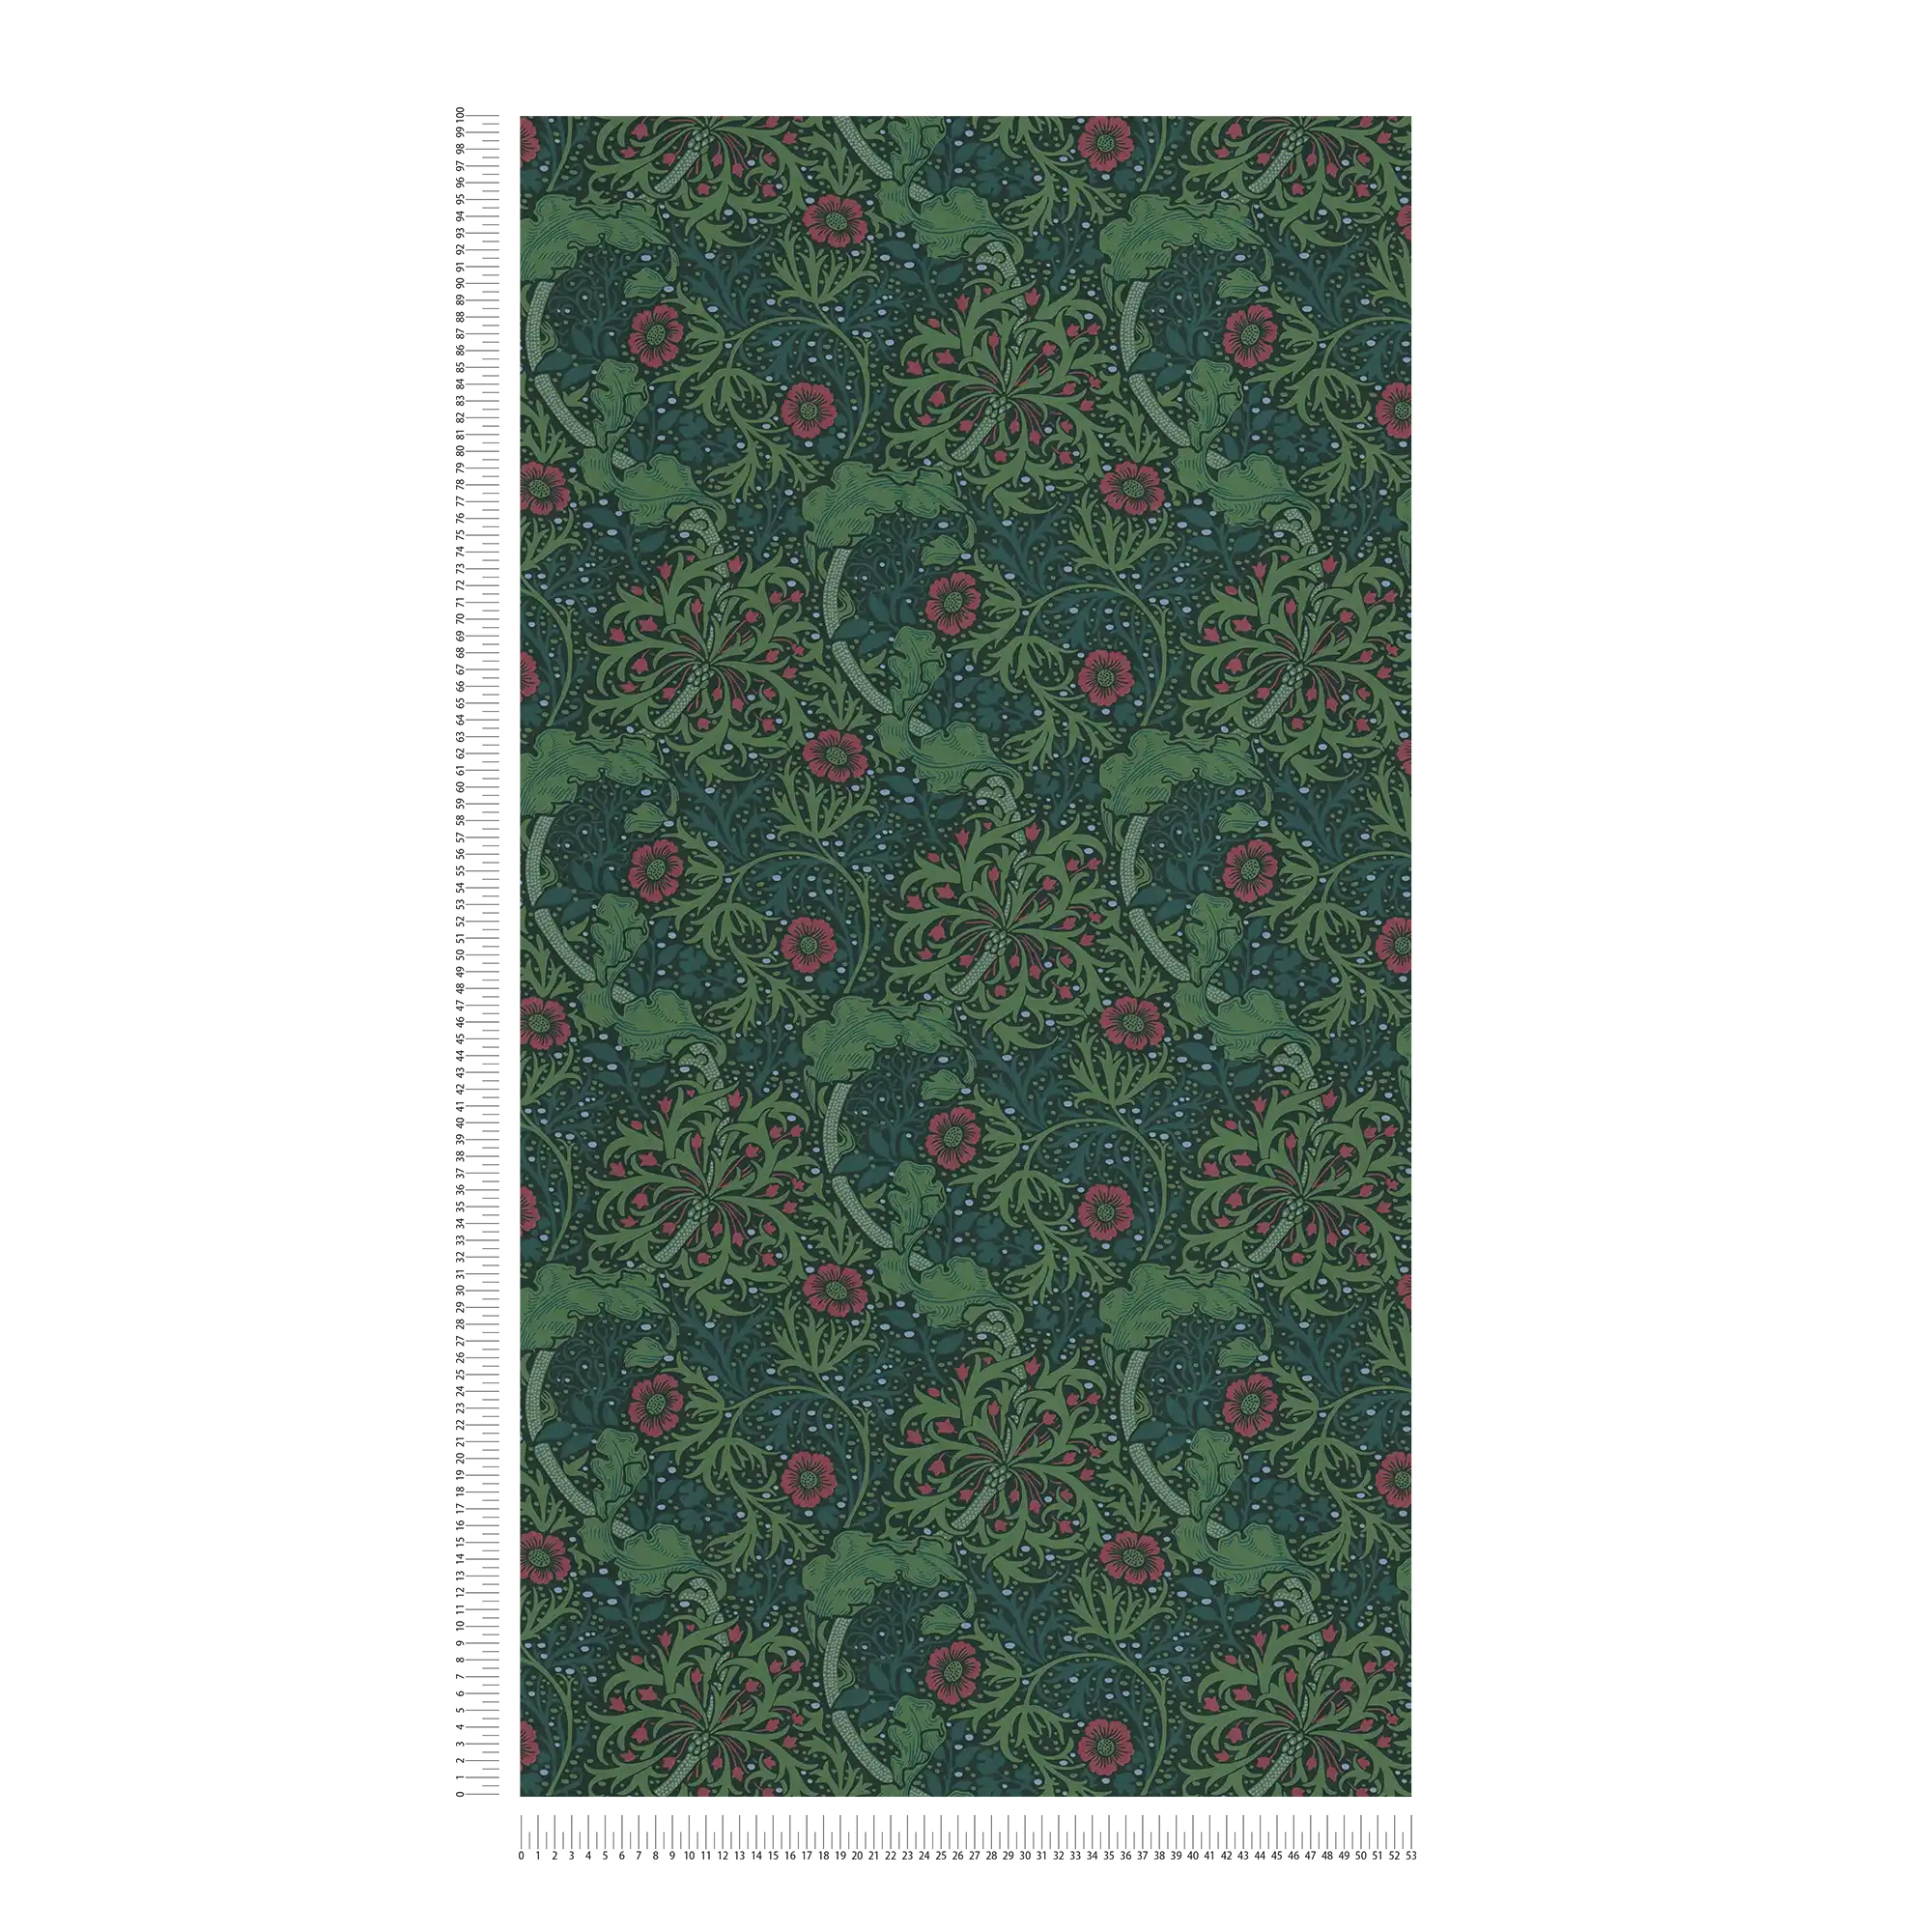             Floral wallpaper with blossoms and flower tendrils - green, pink, black
        